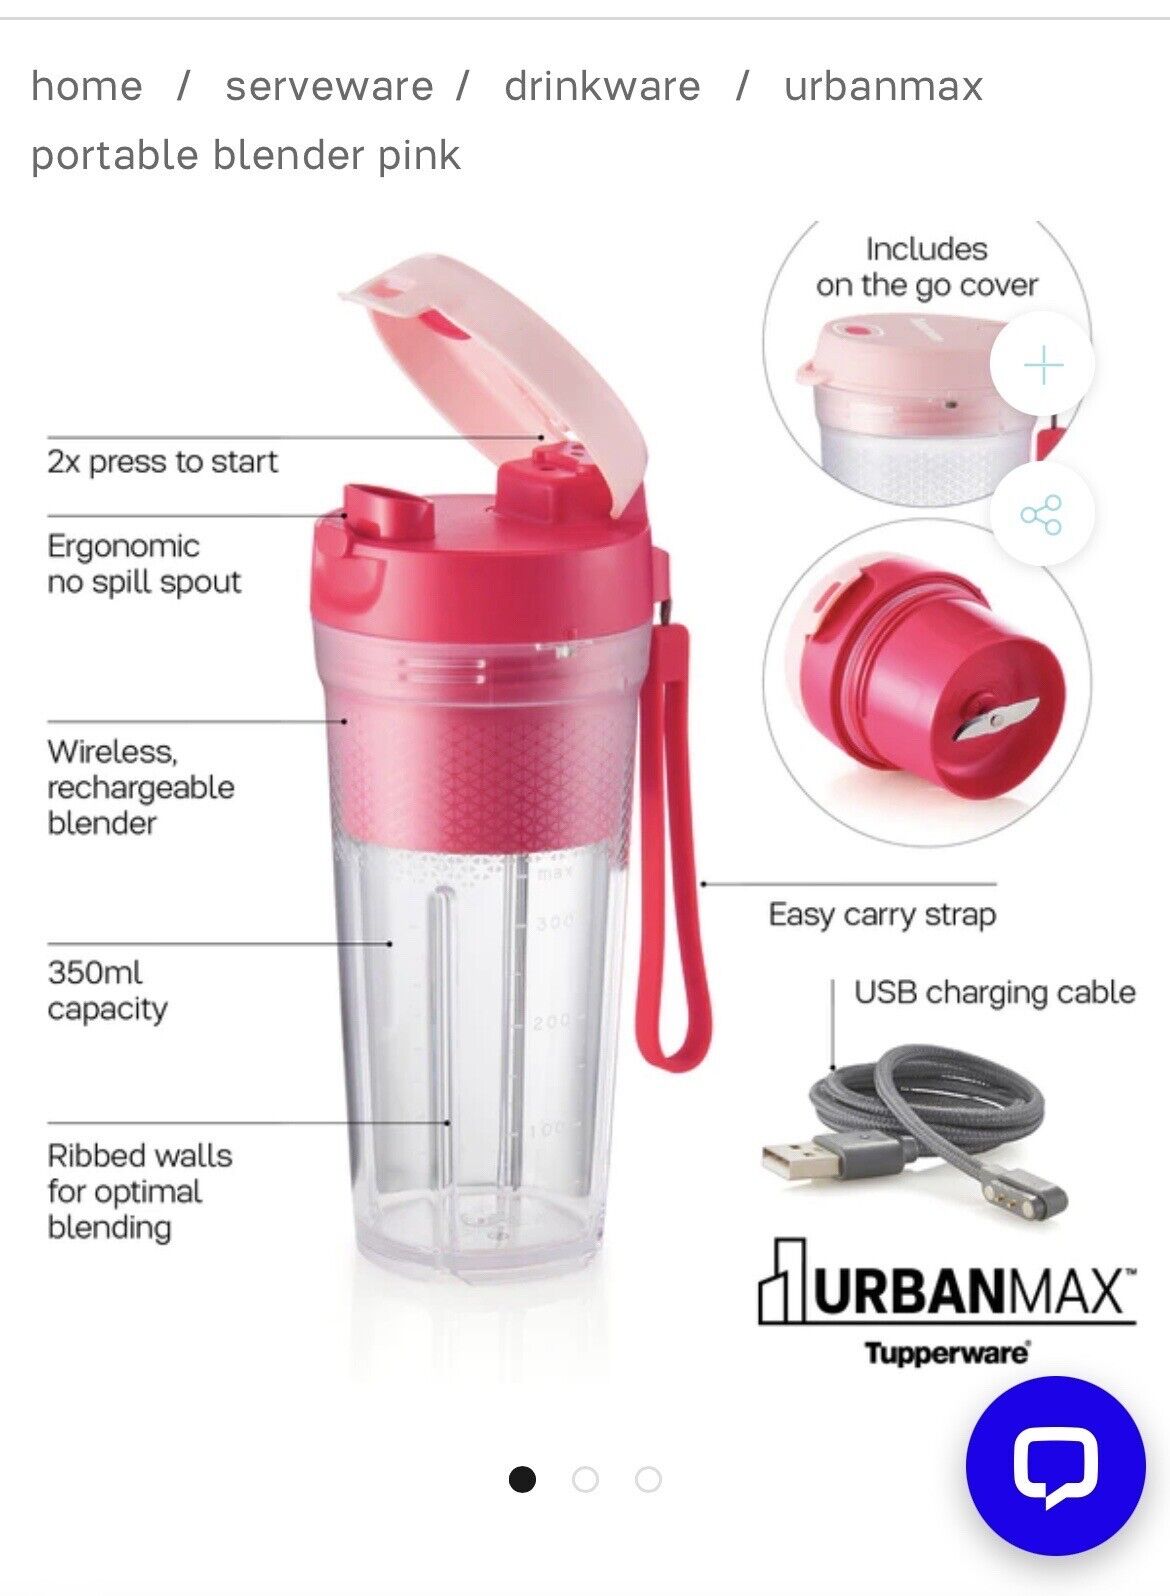 Tupperware Urban Max Rechargeable Wireless & Portable Blender Pink 350ml New